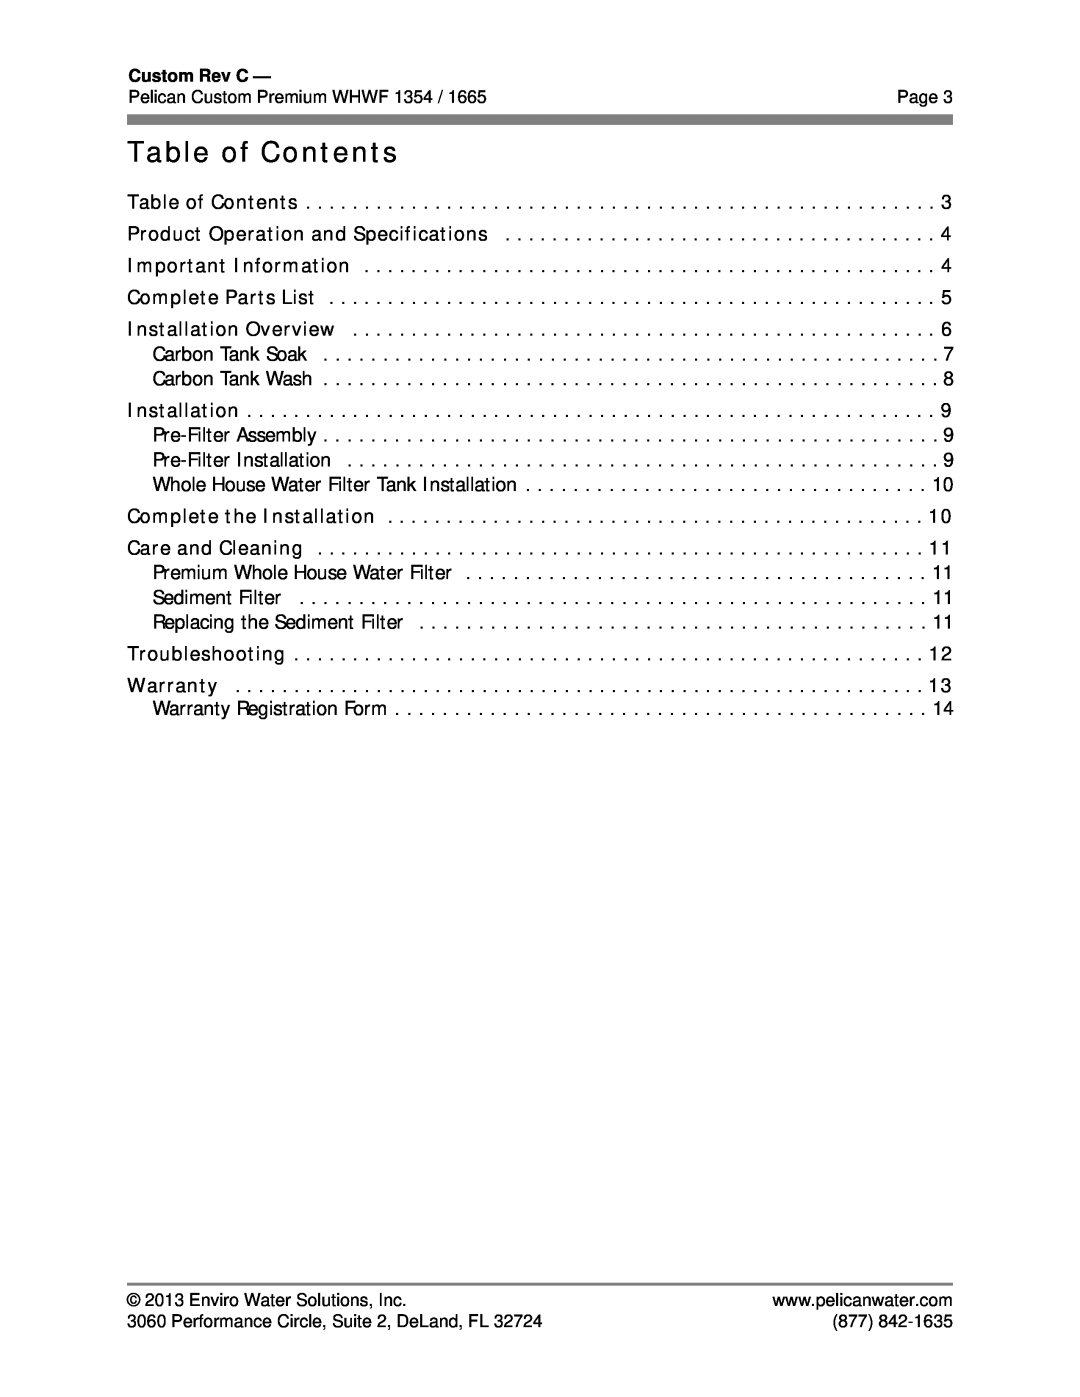 Pelican WHWF 1354 owner manual Table of Contents 